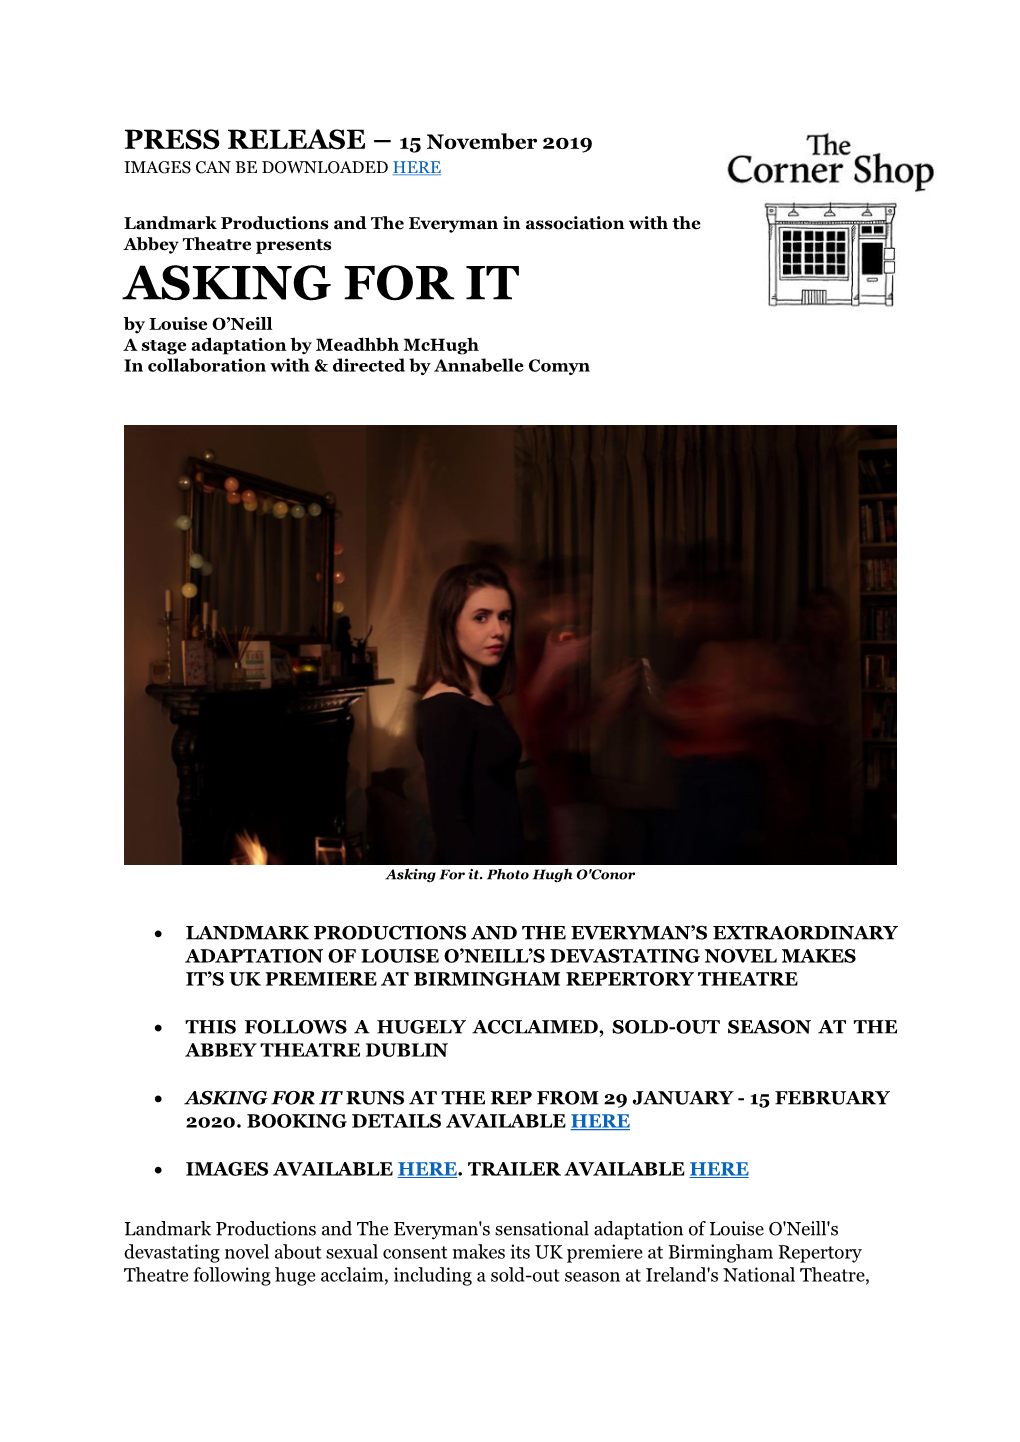 ASKING for IT by Louise O’Neill a Stage Adaptation by Meadhbh Mchugh in Collaboration with & Directed by Annabelle Comyn